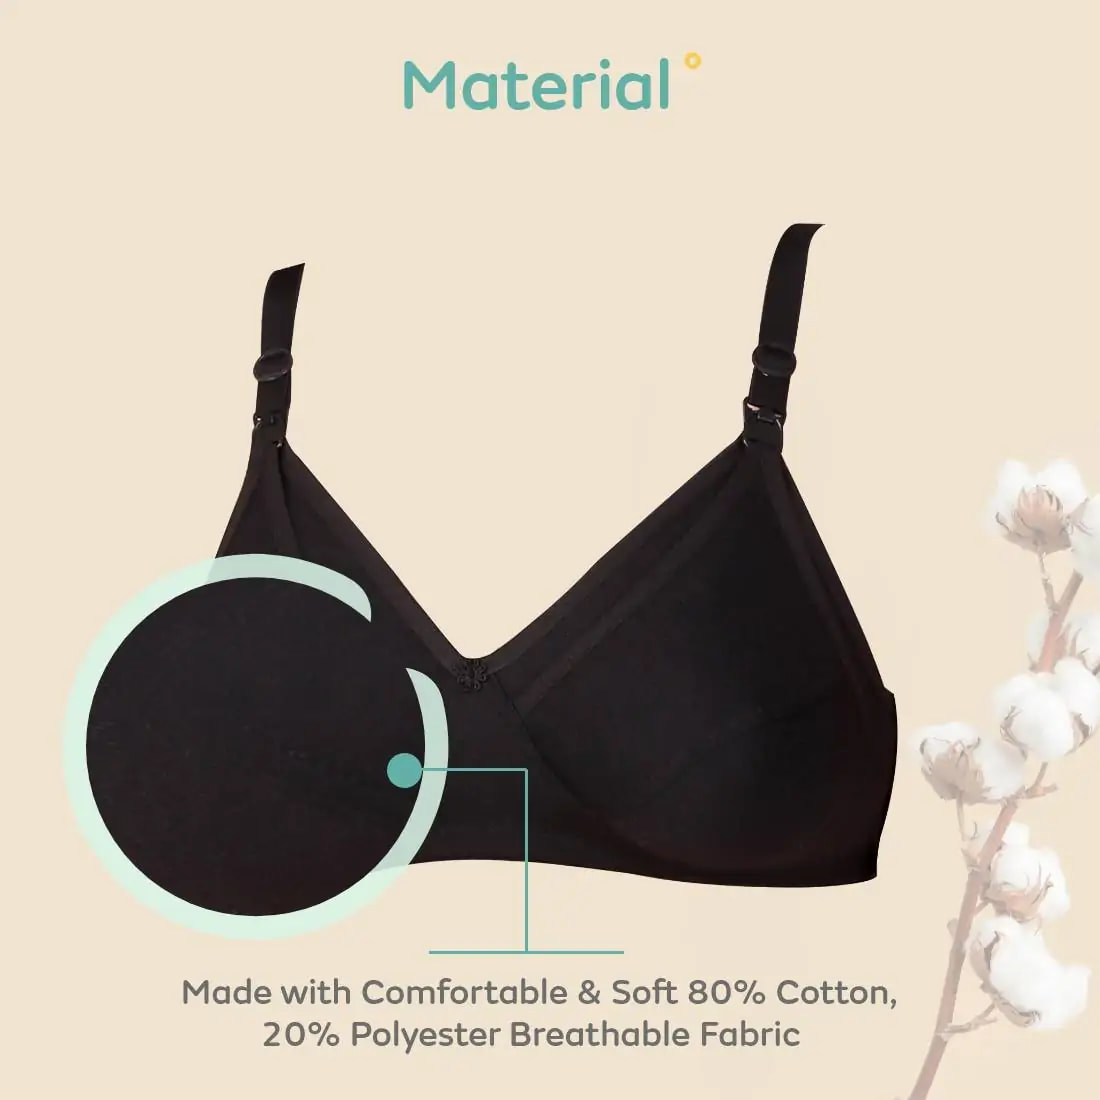 Mylo Maternity/Nursing Bras Non-Wired, Non-Padded - Pack of 3 with free Bra Extender (Classic Black, Classic White, Magnolia Cream) 36 C